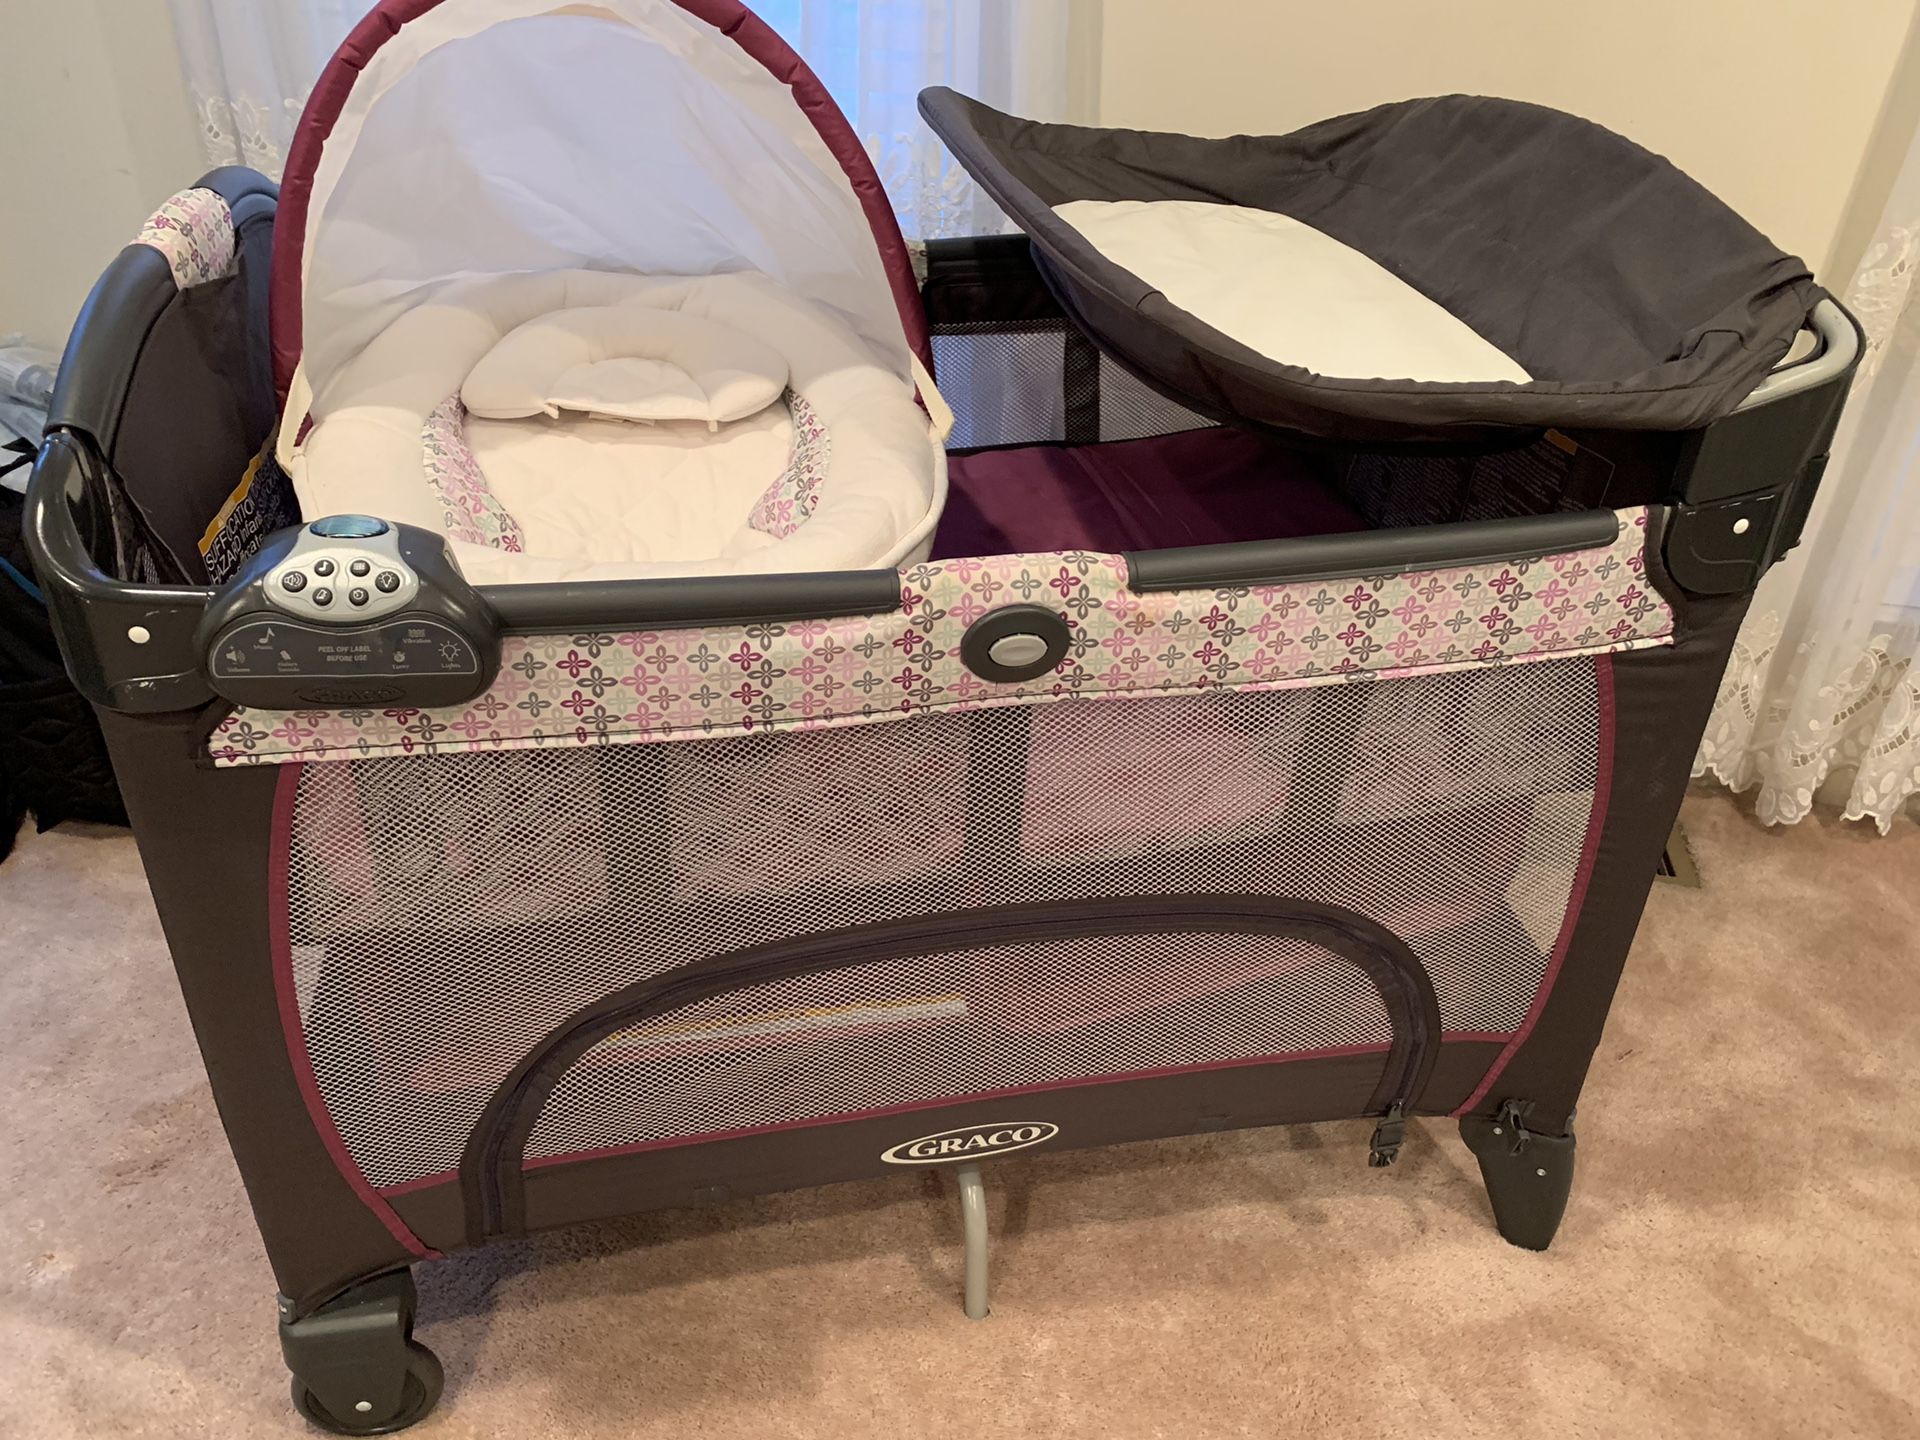 Graco pack and play XL